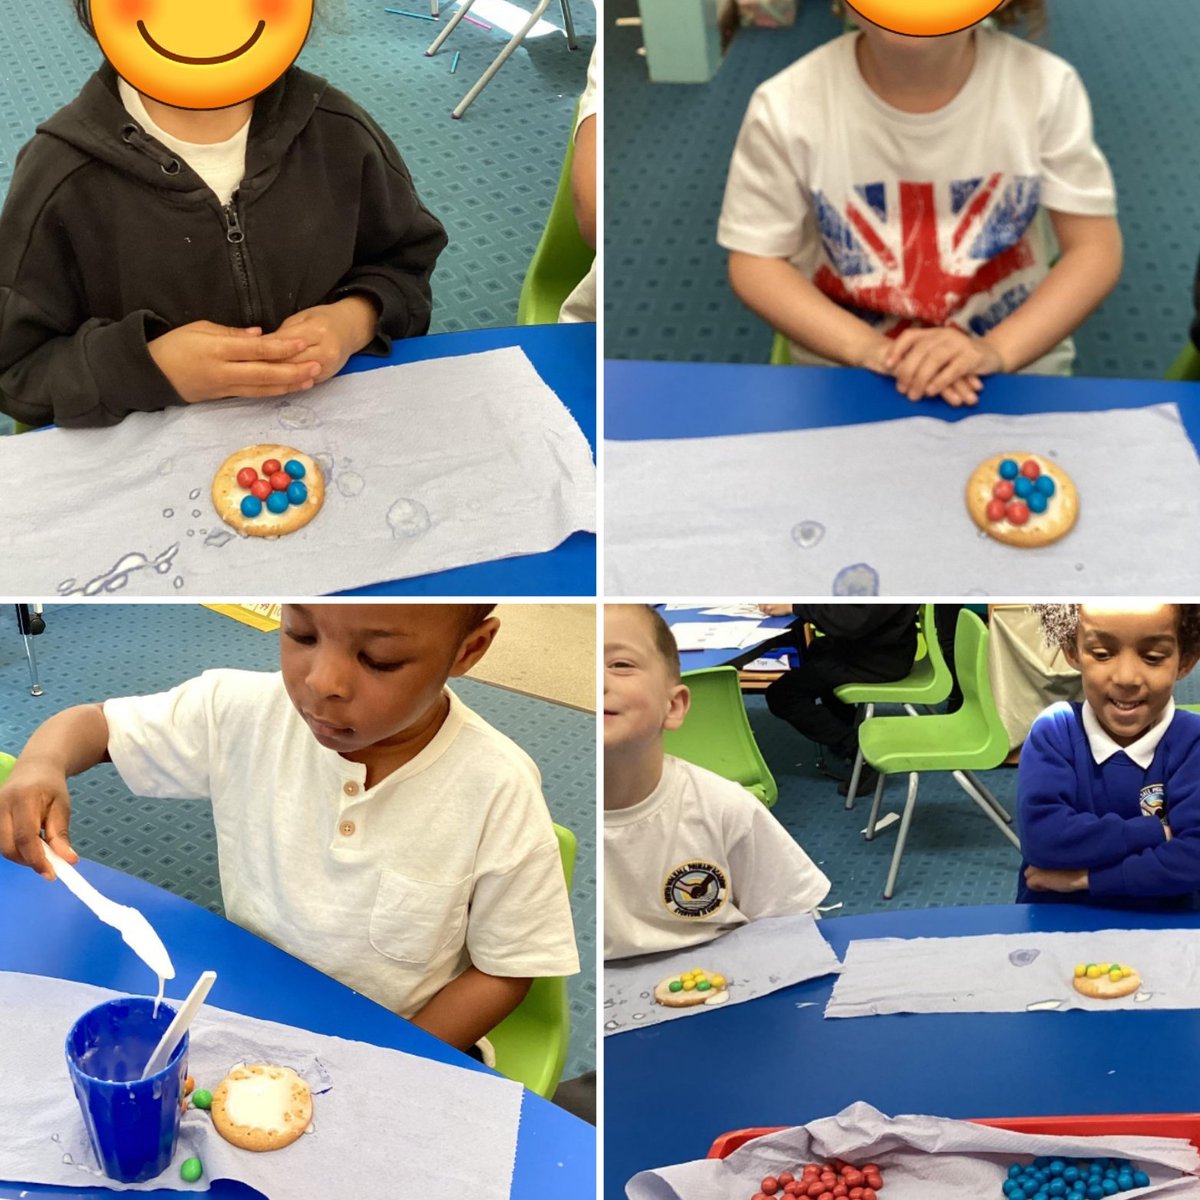 Reception have celebrated the Jubilee in style. We have created our own decorations, painted pictures, collaged the queen's silhouette, decorated biscuits and made our own crowns. We had a blast at the picnic and bounsed all over the bouncy castle. #JubileeCelebrations #EYFS